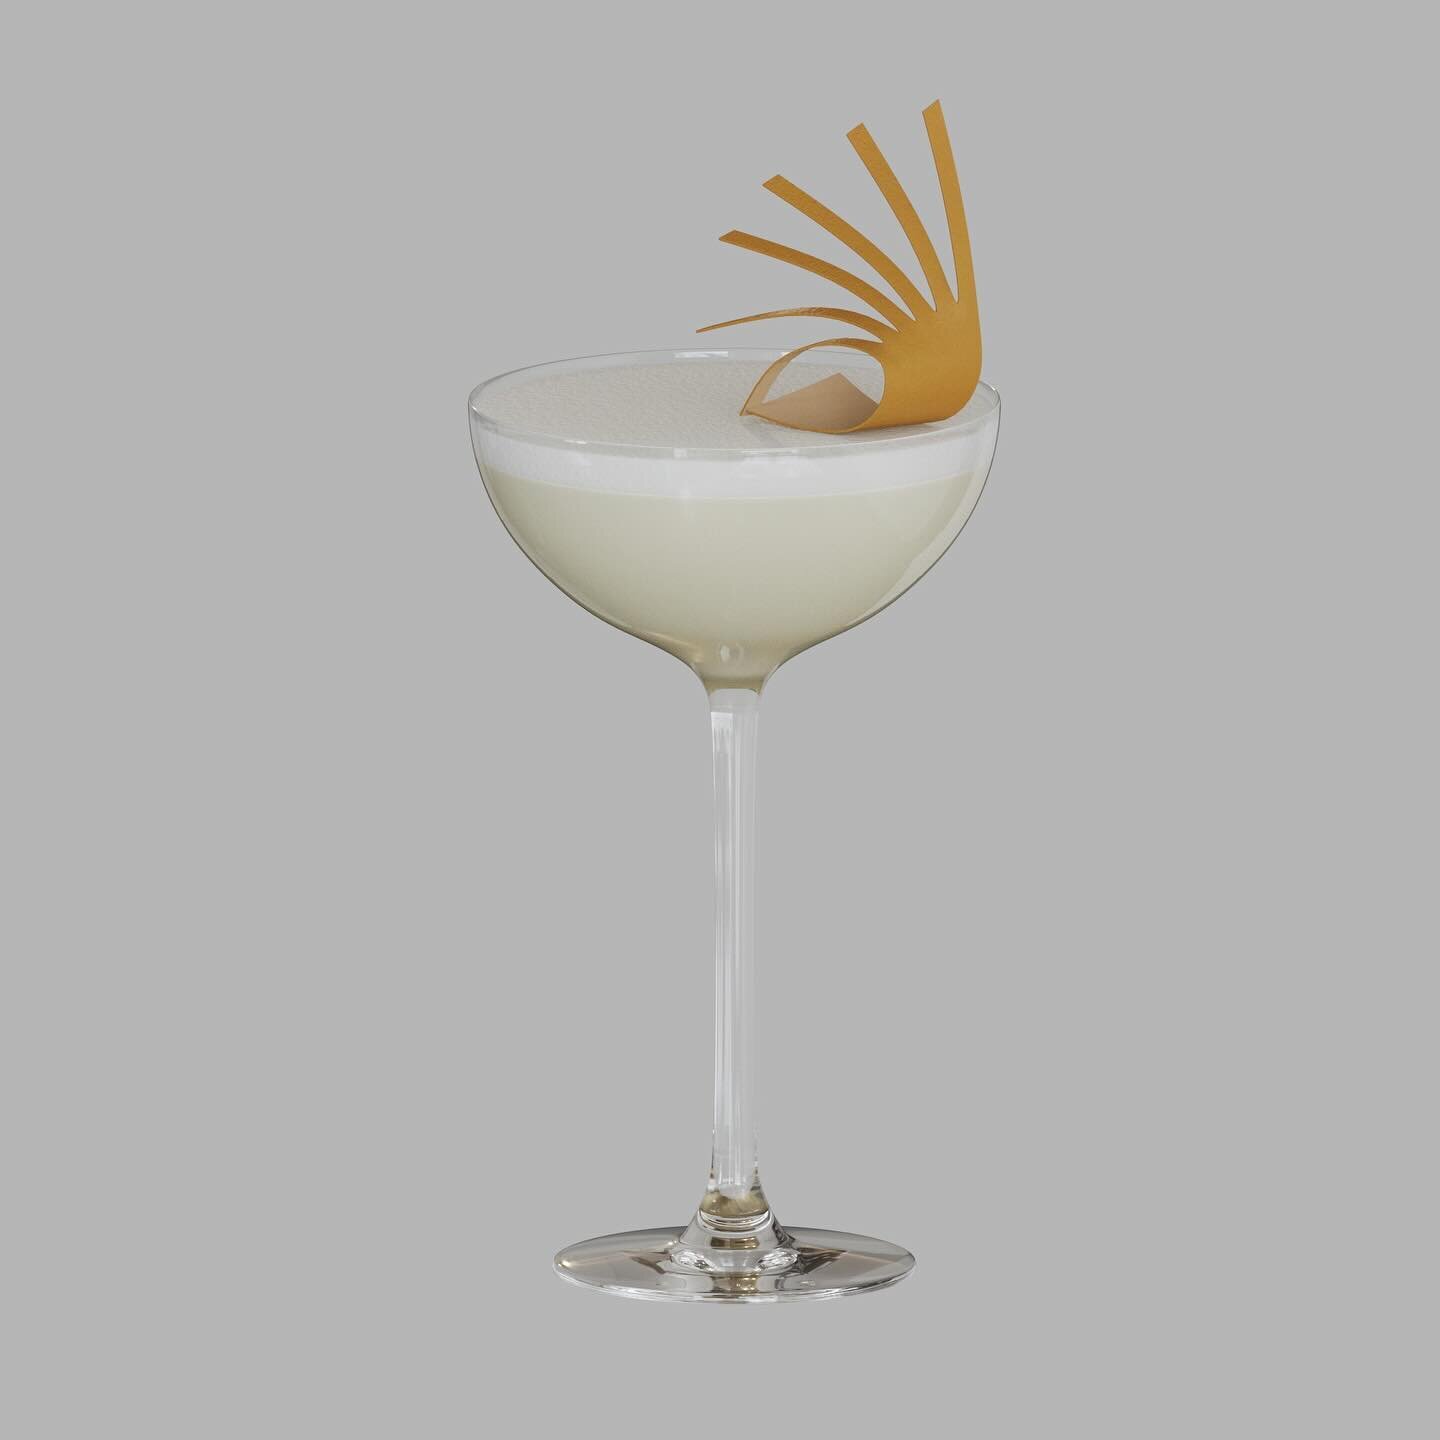 Experimenting some 3D mixology

#cocktails #3dassets #drinks #details #3dsmaxvray